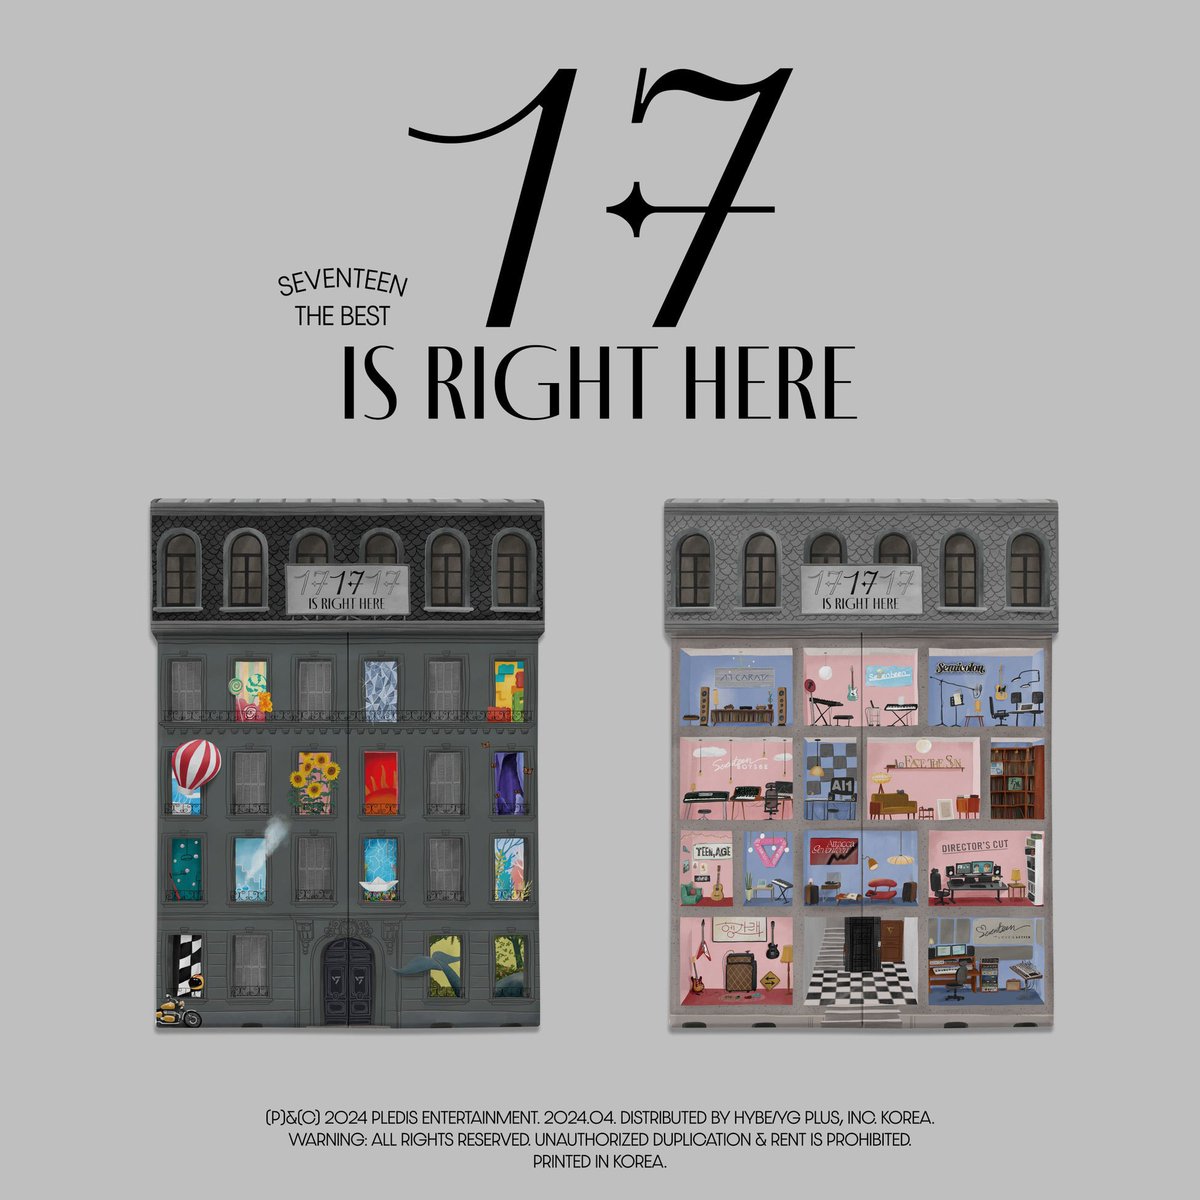 [HELP RT] WTS 🇲🇾
SEVENTEEN ‘17 IS RIGHT HERE’ (Regular album)

- Here Ver: ✅✅
- Hear Ver: ✅✅

☁️ RM150 each (only excl local postage)
☁️ Buy set free postage
☁️ Sealed album
☁️ On-hand 

#pasarseventeen #pasarSVT